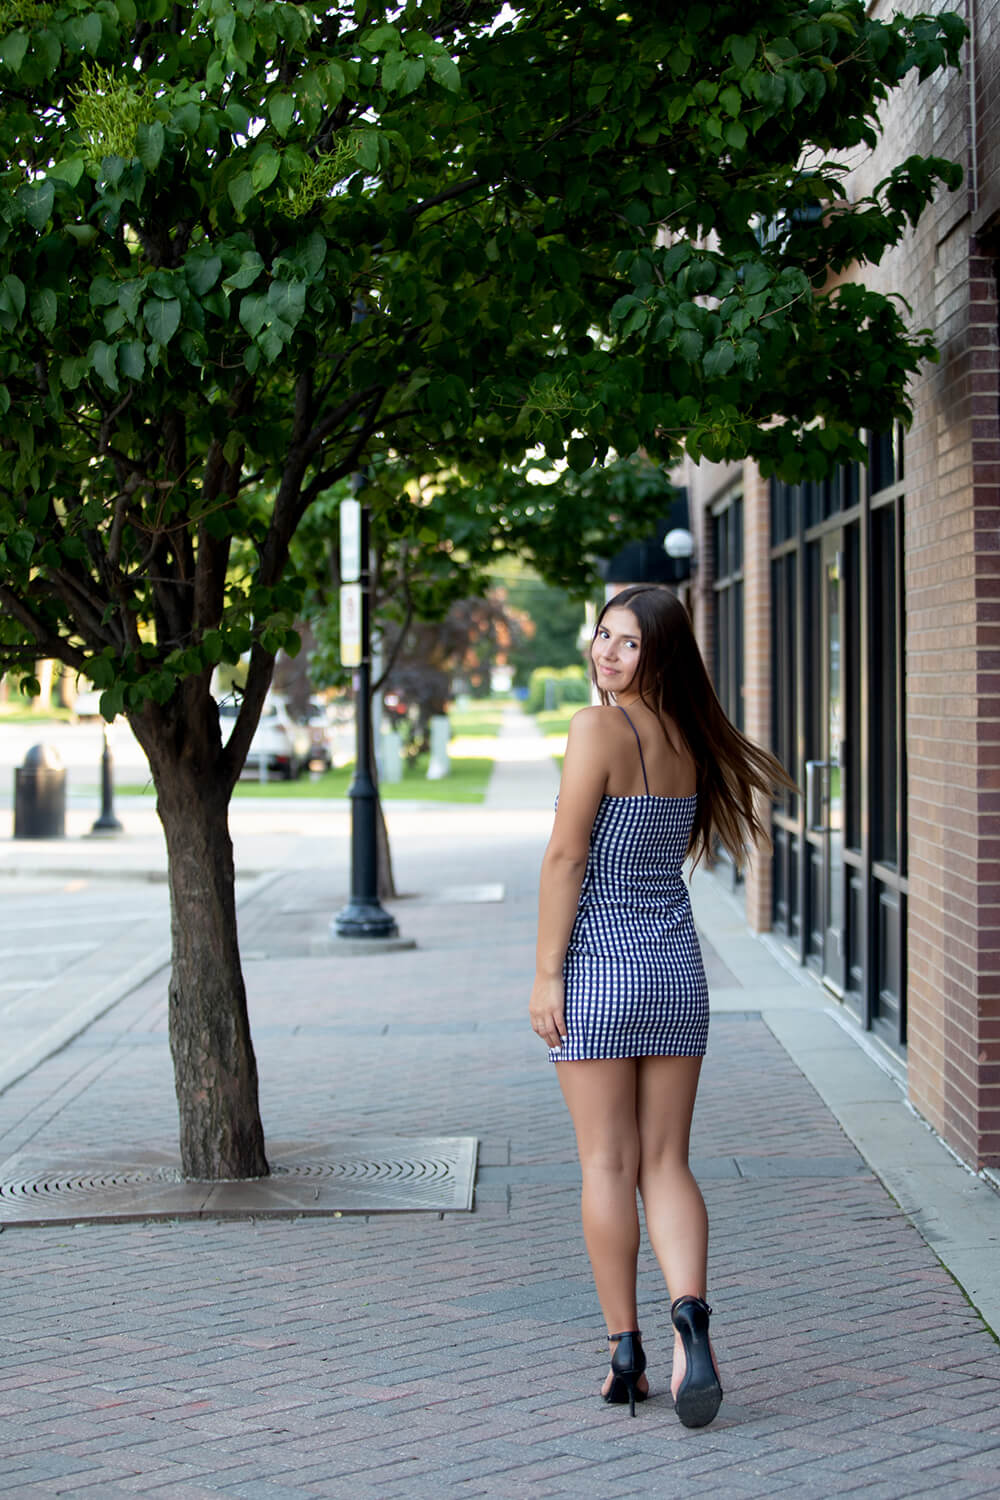 grad photography session with teen girl walking down an urban street and looking back